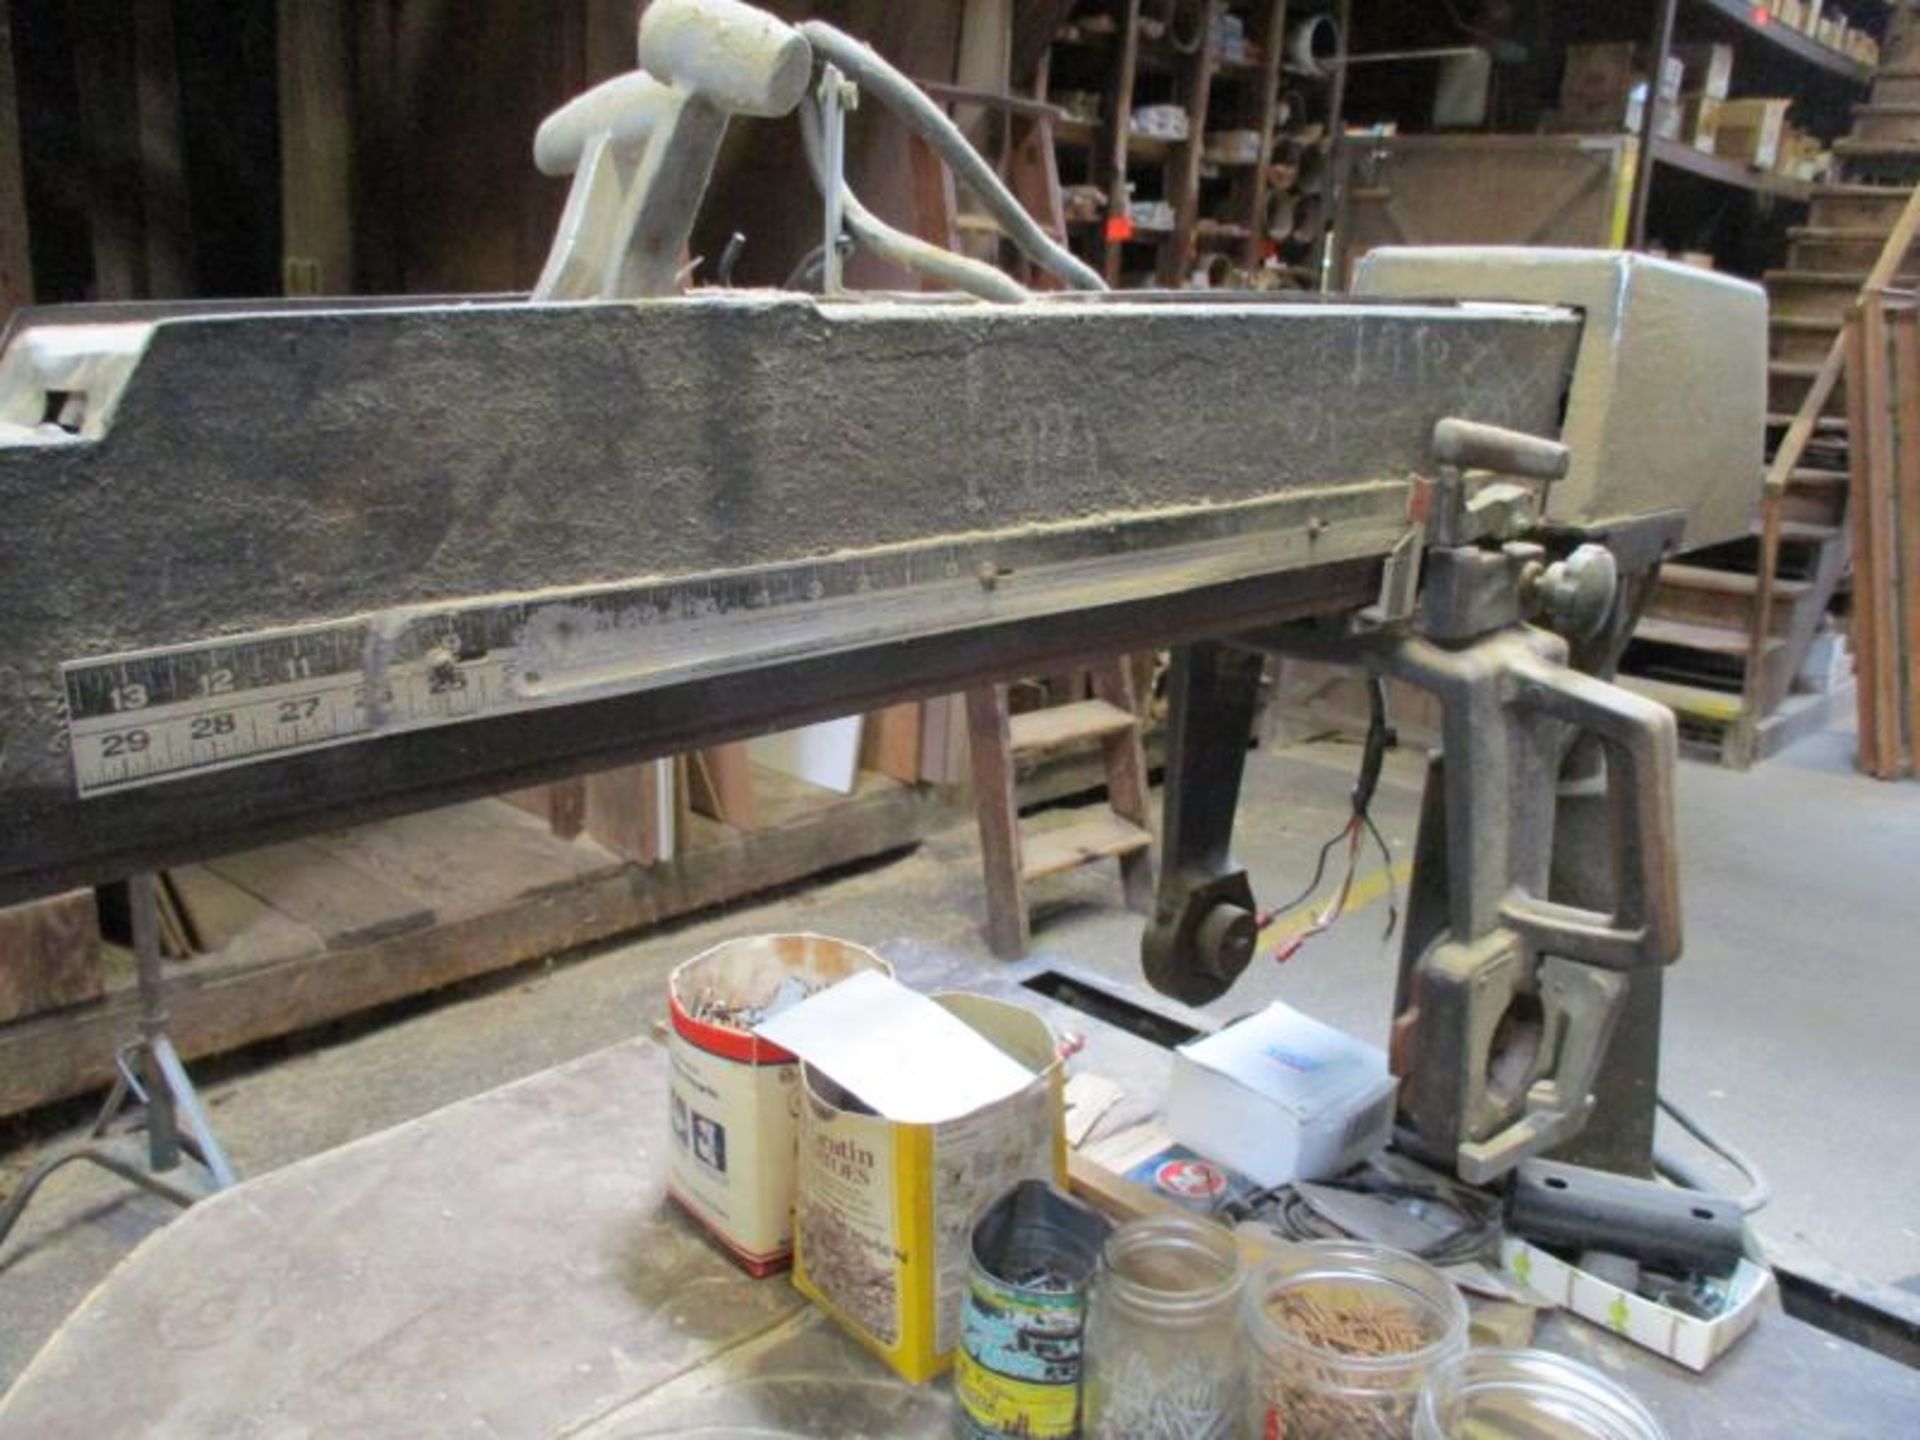 Dewalt Industrial Construction Radial Arm Saw - Not Working - Image 11 of 11